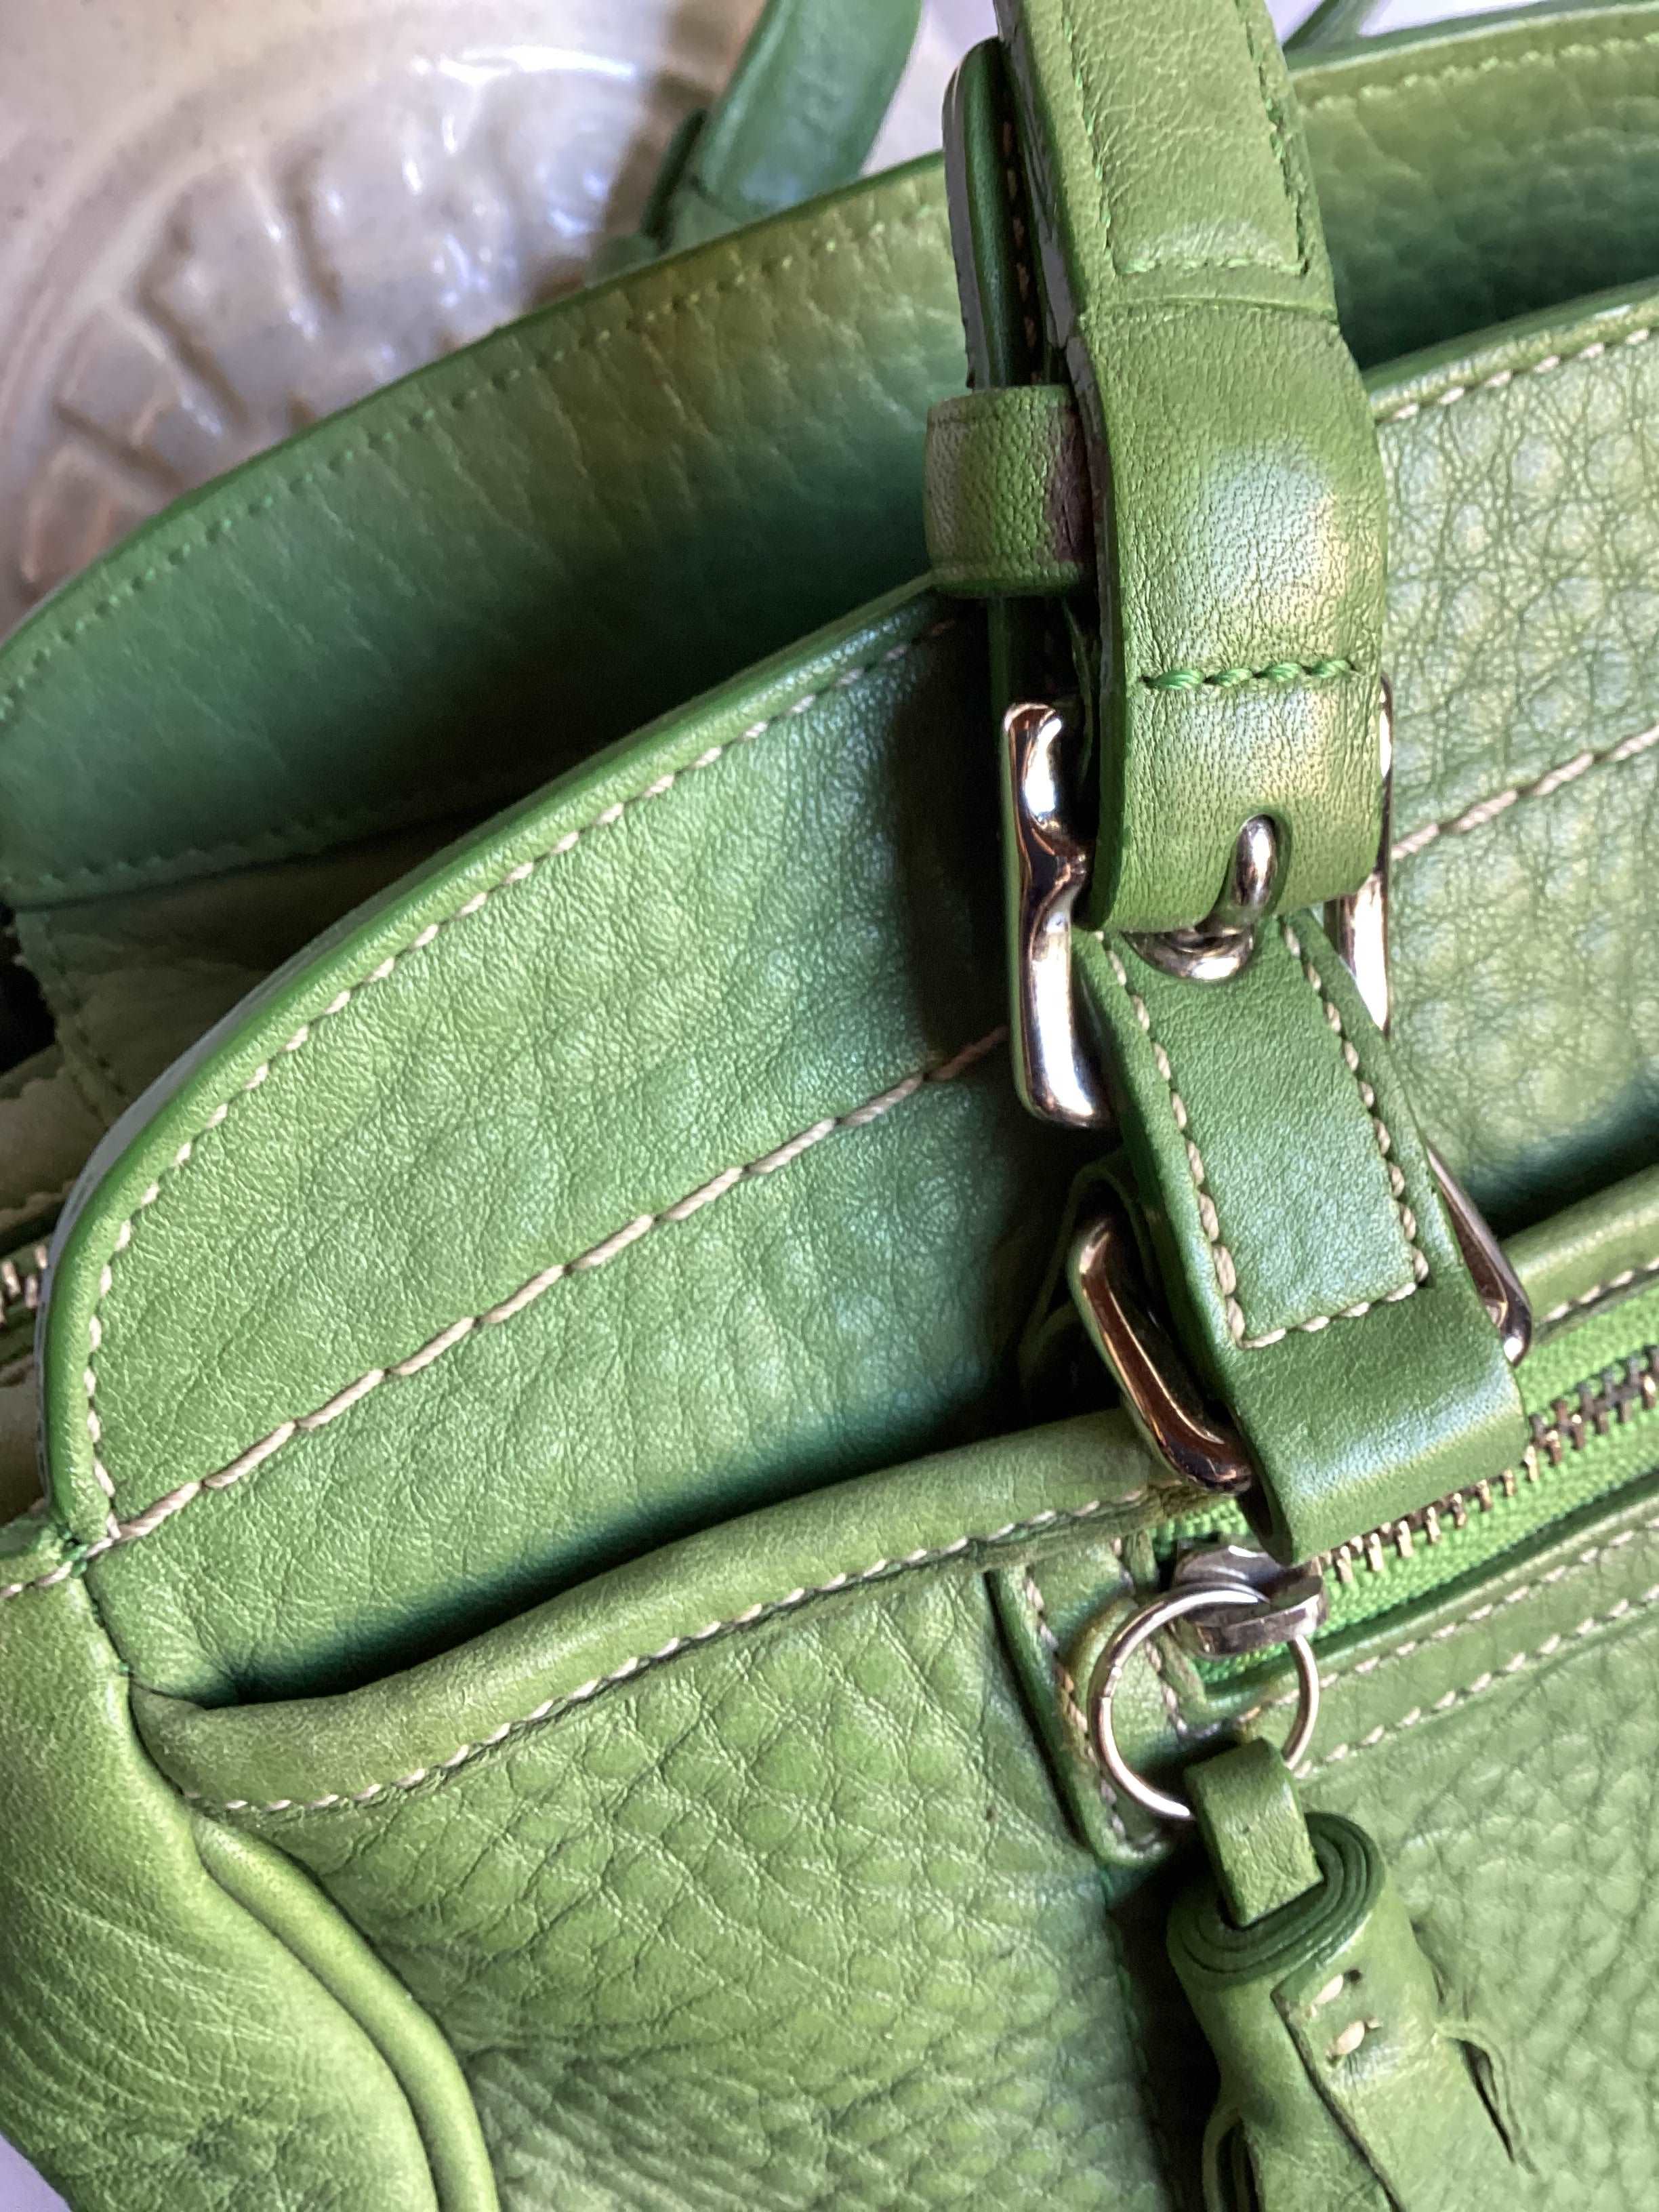 Coach Small Town Bucket Bag Pista Washed Green Leather Purse NWT $359  195031189203 | eBay